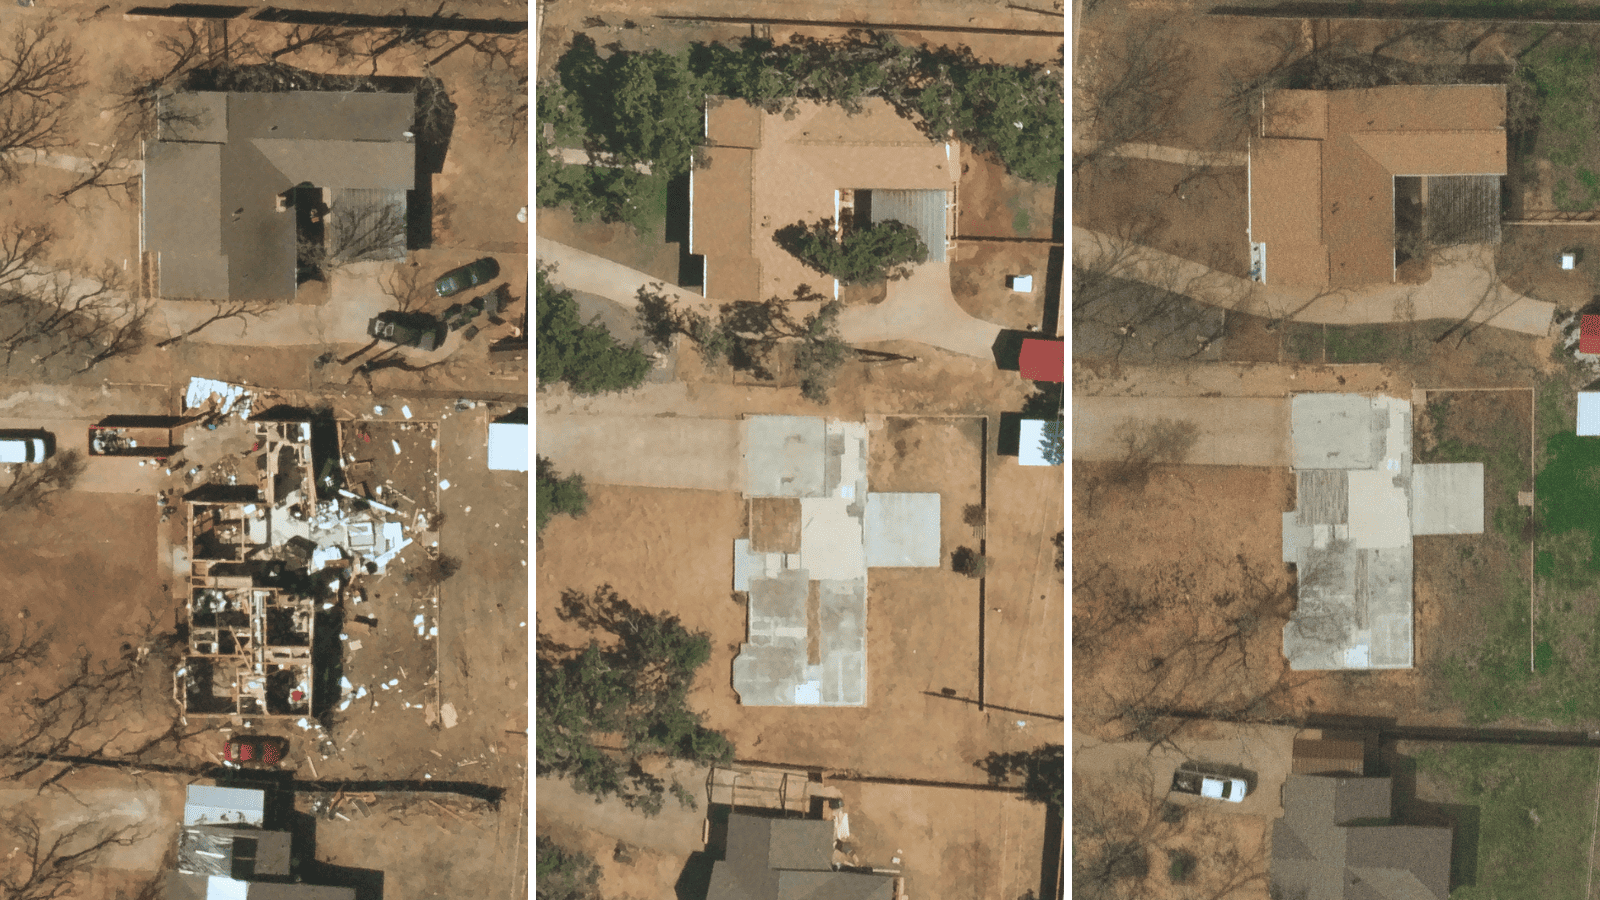 Near Space Labs high-frequency captures (3) that show a damaged property post-tornado and the development progress a year later. The final image shows the base foundation of the property with no construction started. 